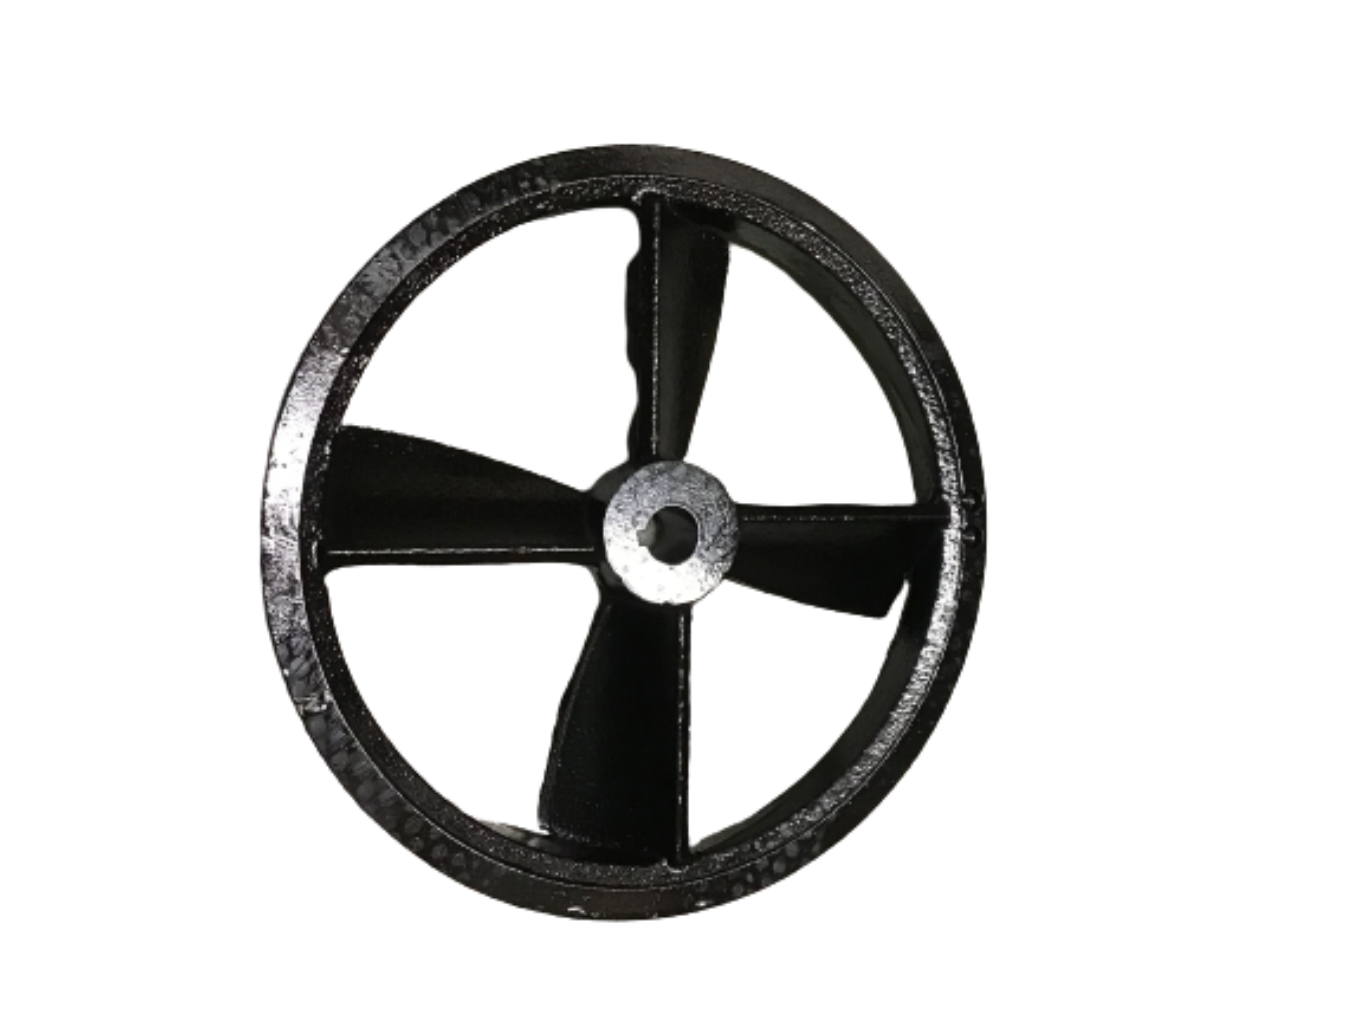 Pulley Fly Wheel For Air Compressor